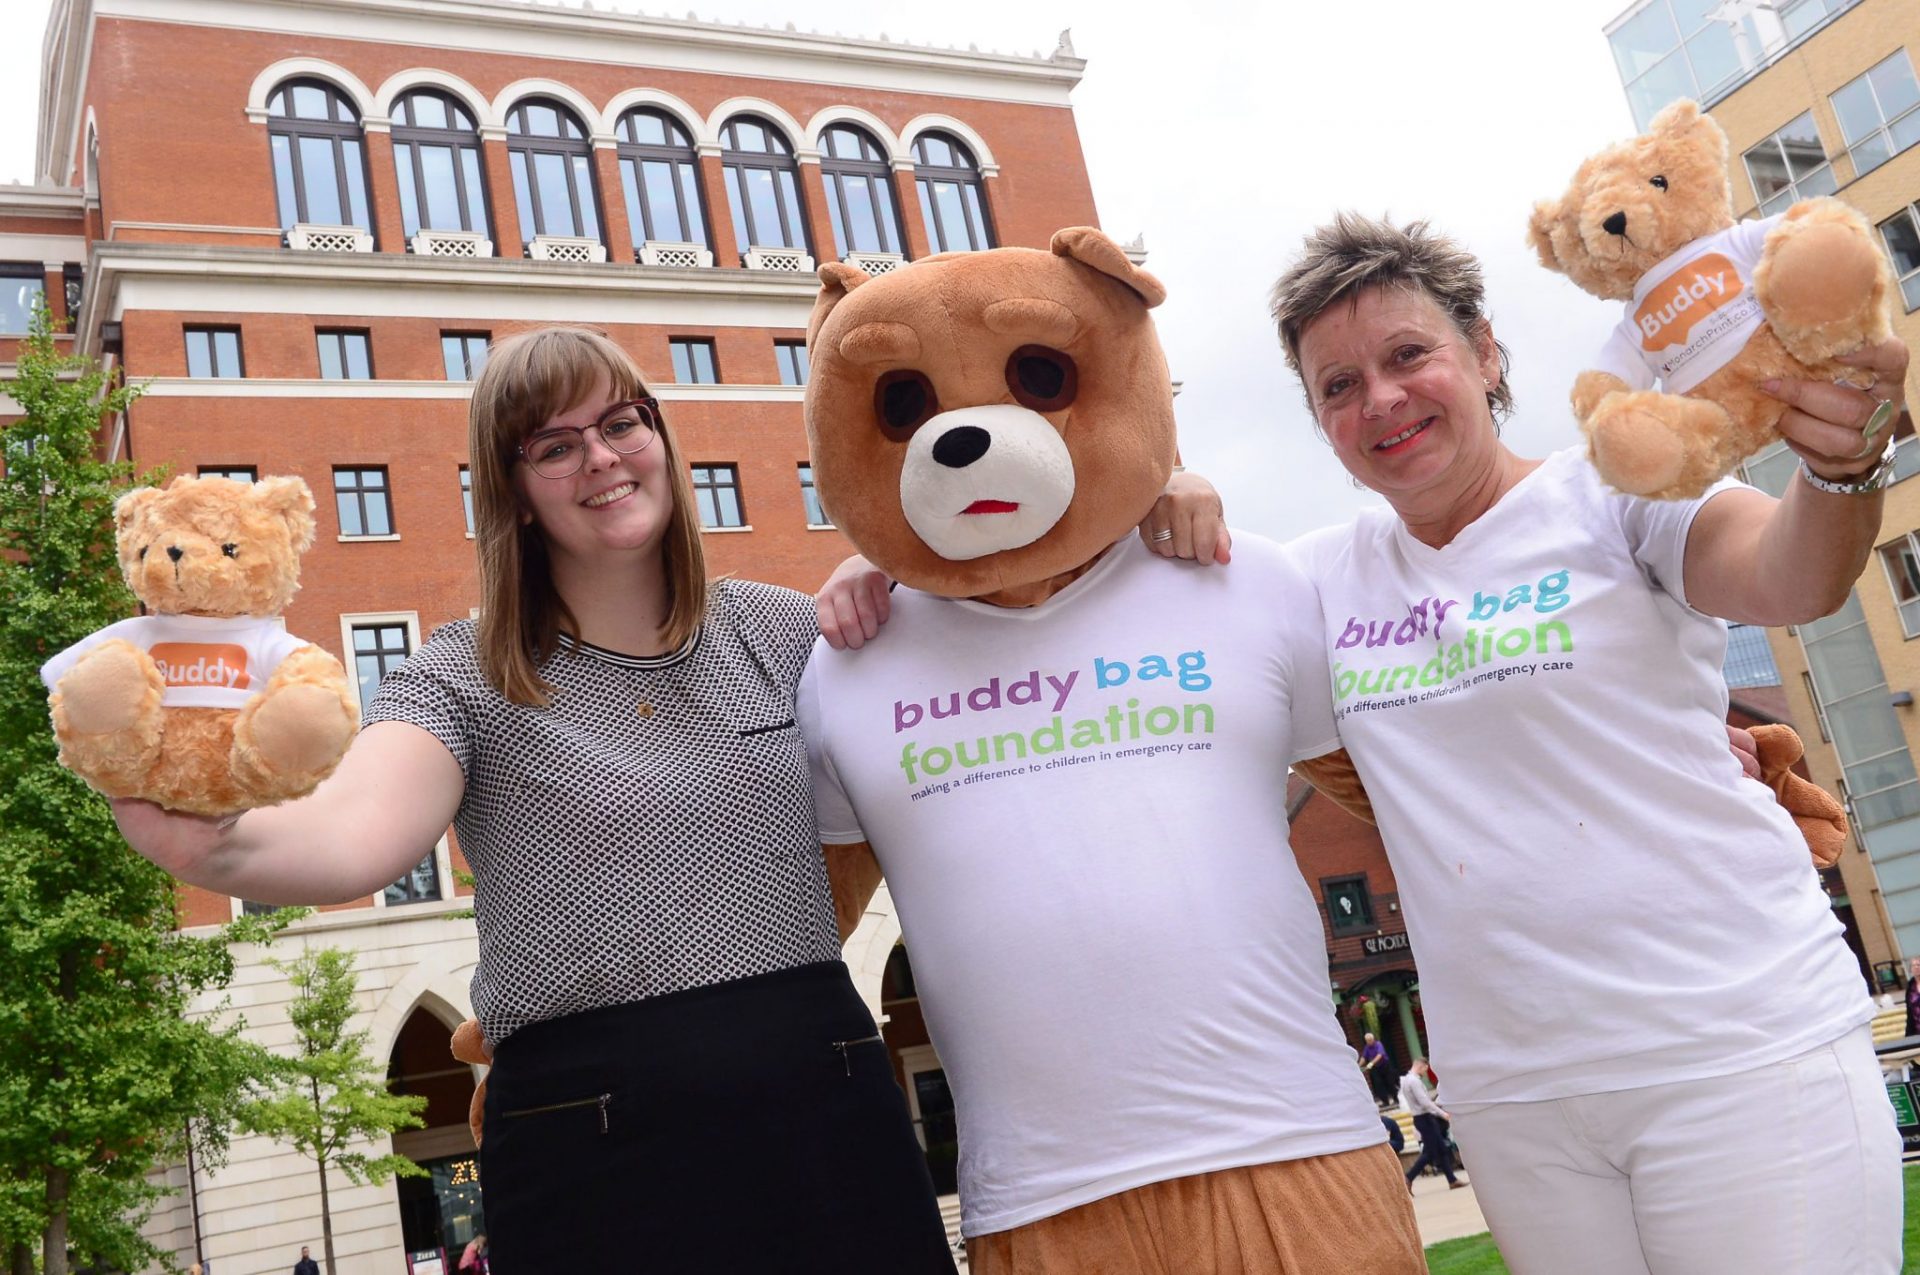 Two women hugging a person in a bear costume in Brindleyplace, Birmingham.